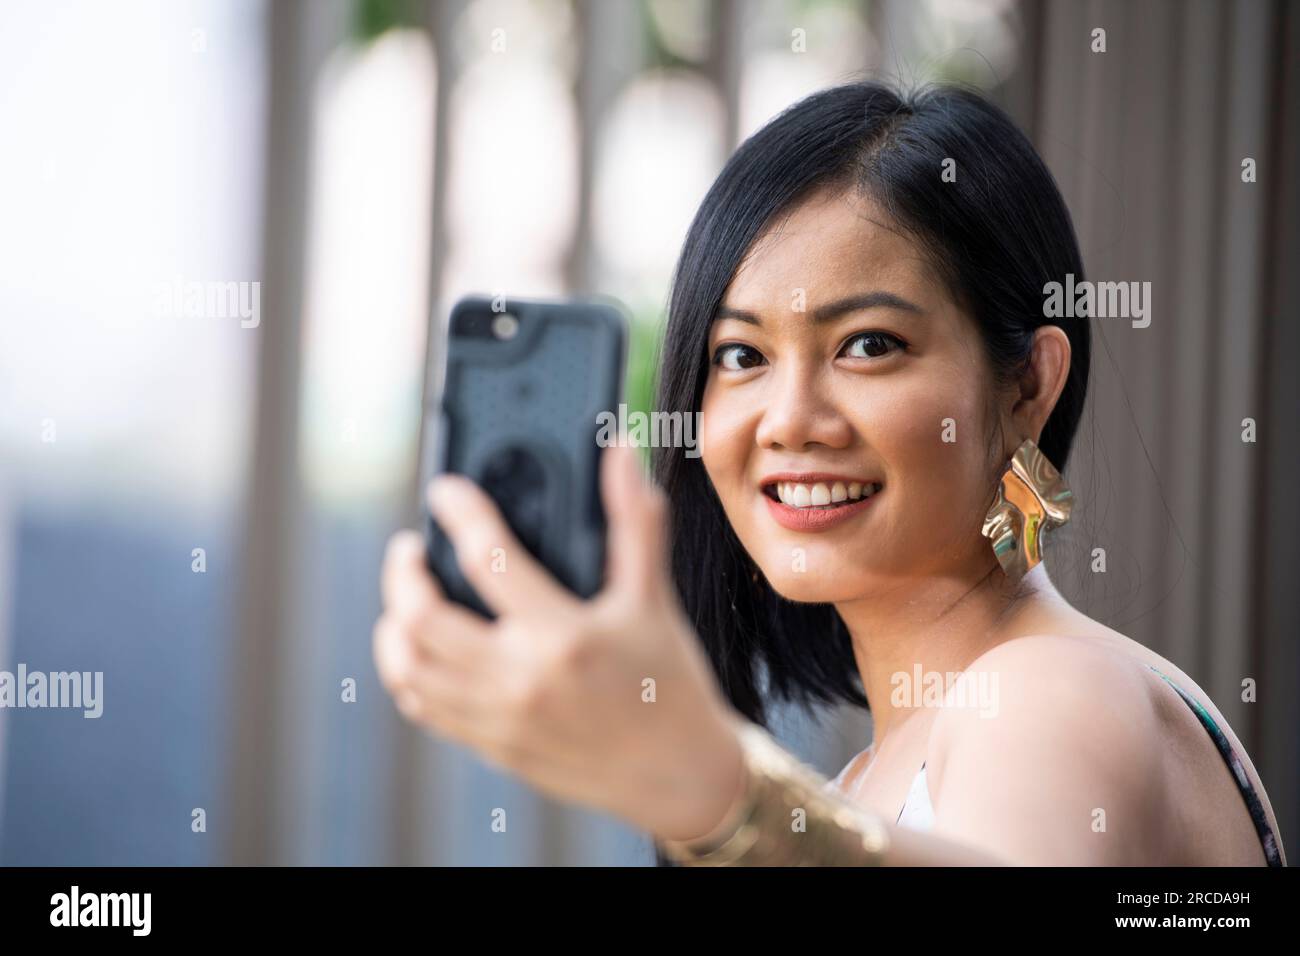 Thai woman taking a selfie with smartphone Stock Photo